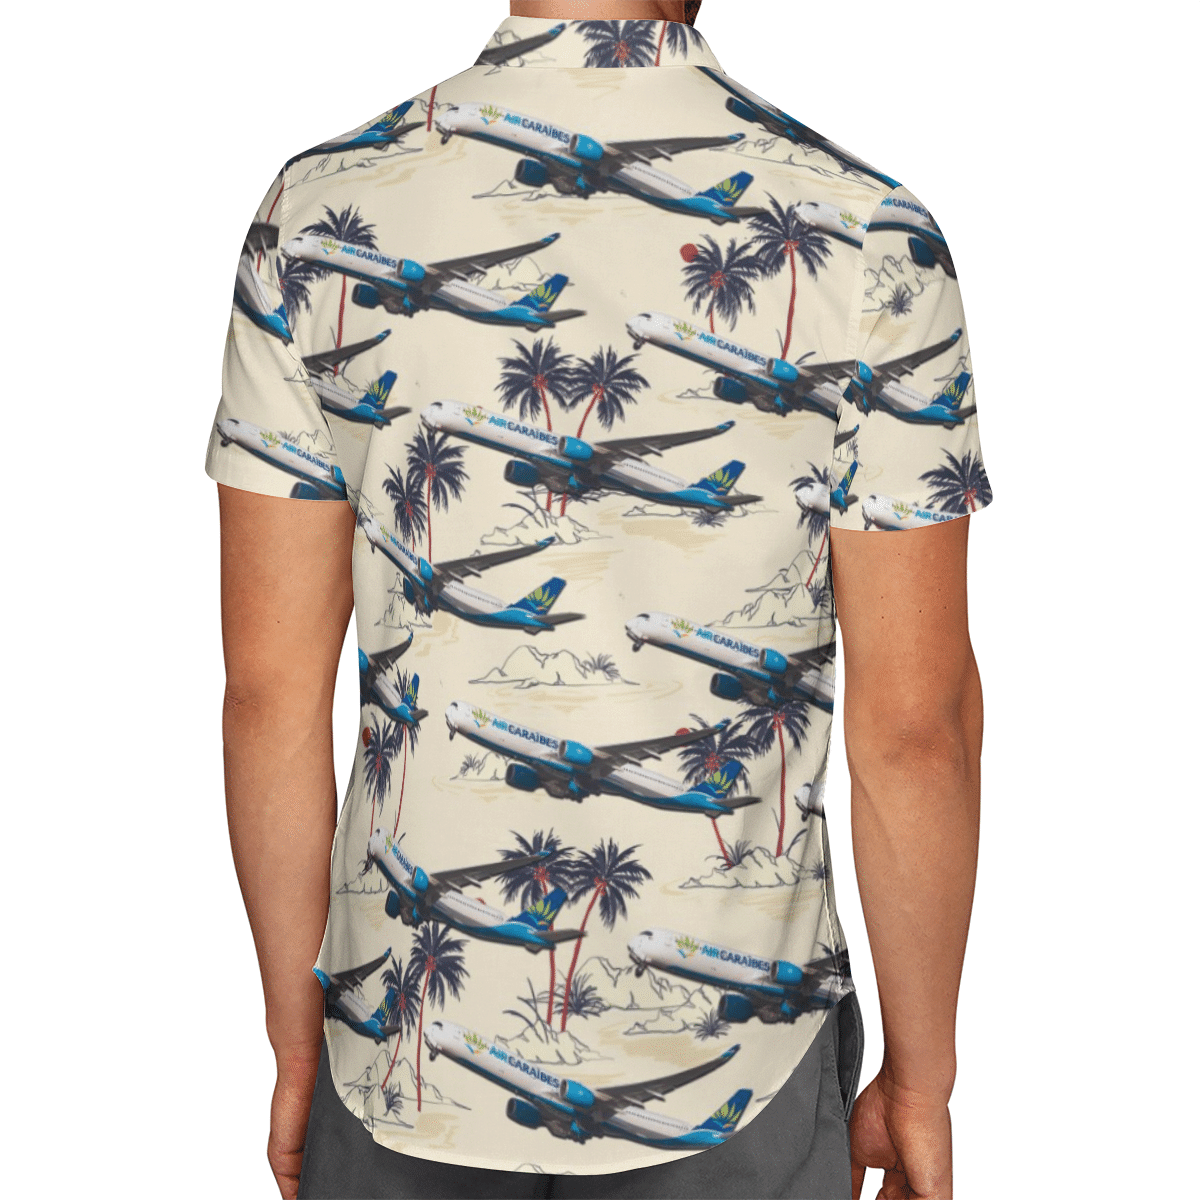 Going to the beach with a quality shirt 131